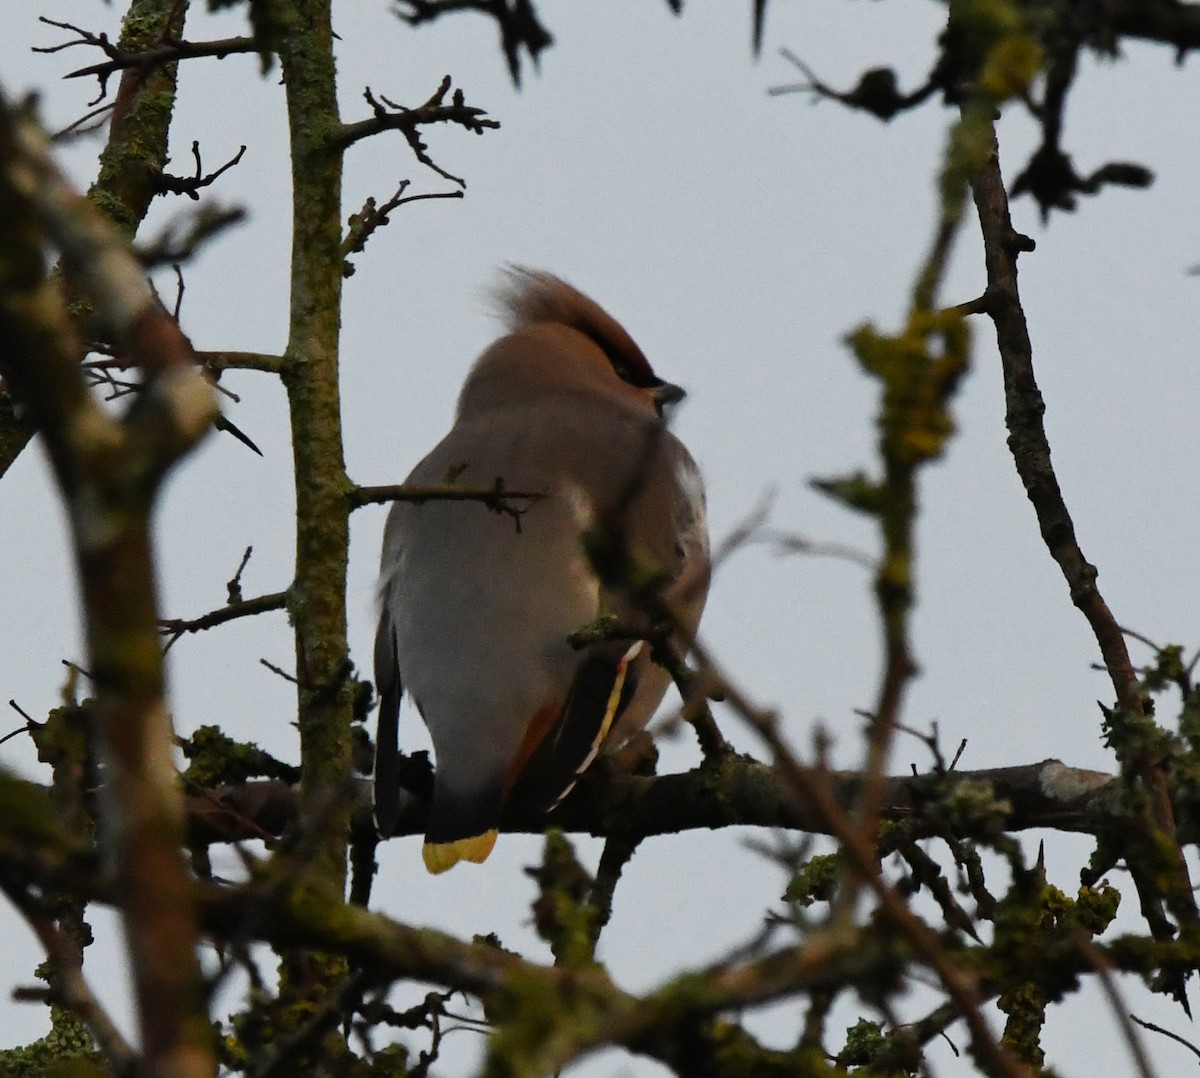 Bohemian Waxwing - A Emmerson